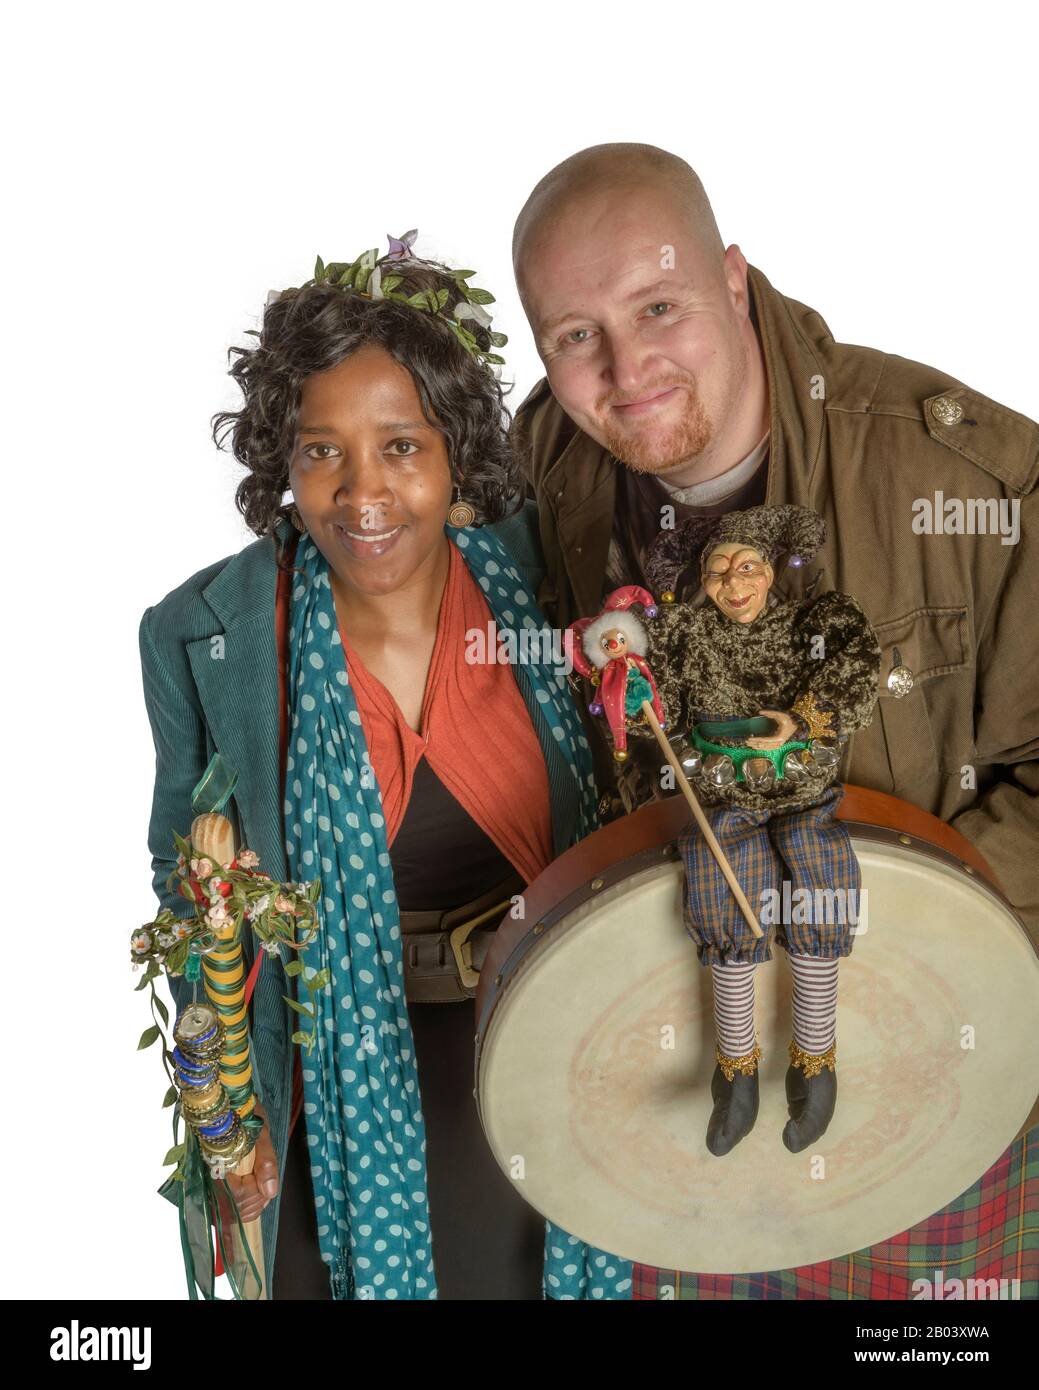 Puppet Couple High Resolution Stock Photography and Images - Alamy